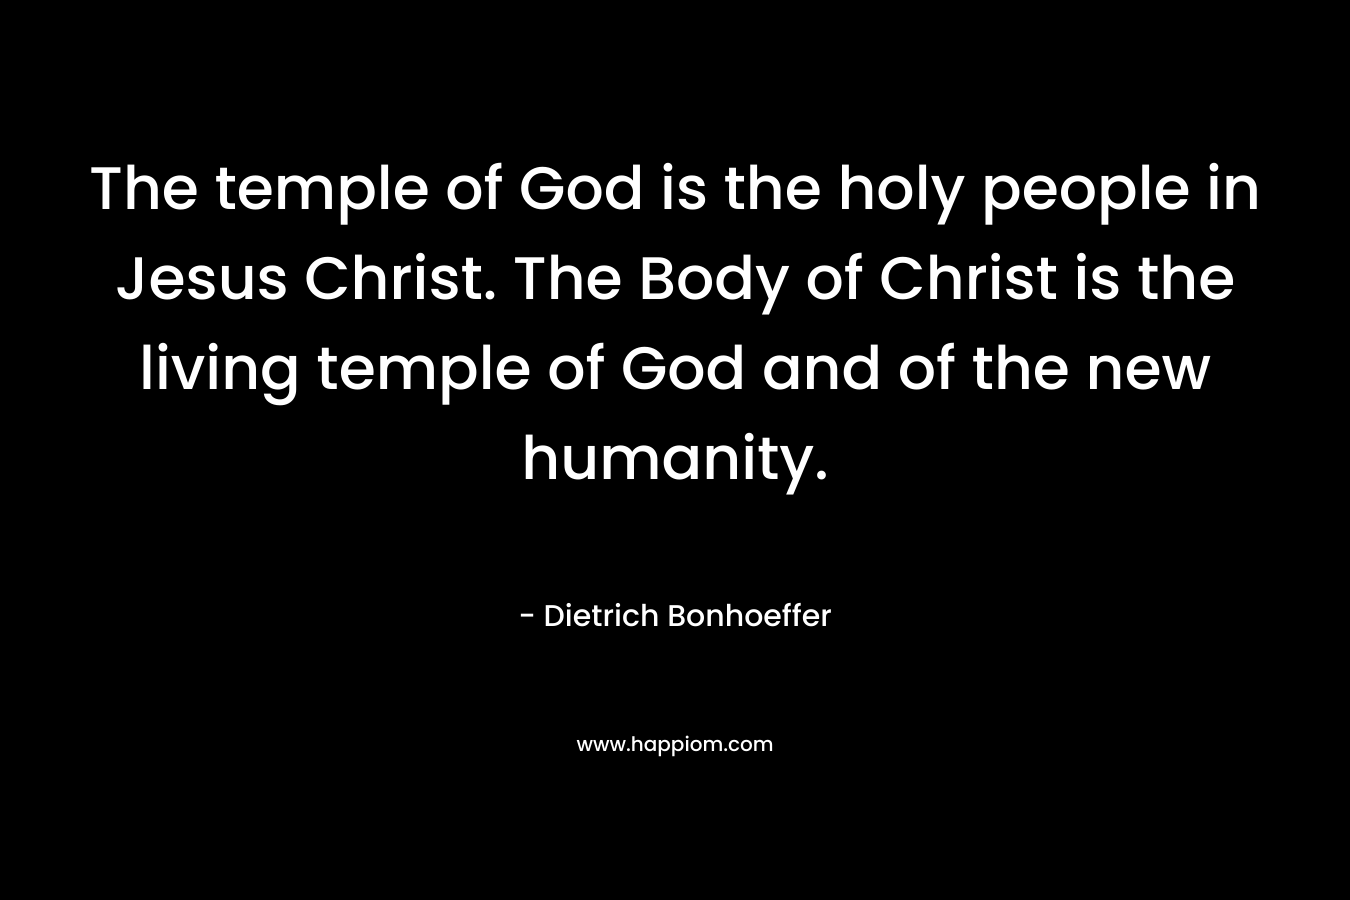 The temple of God is the holy people in Jesus Christ. The Body of Christ is the living temple of God and of the new humanity.